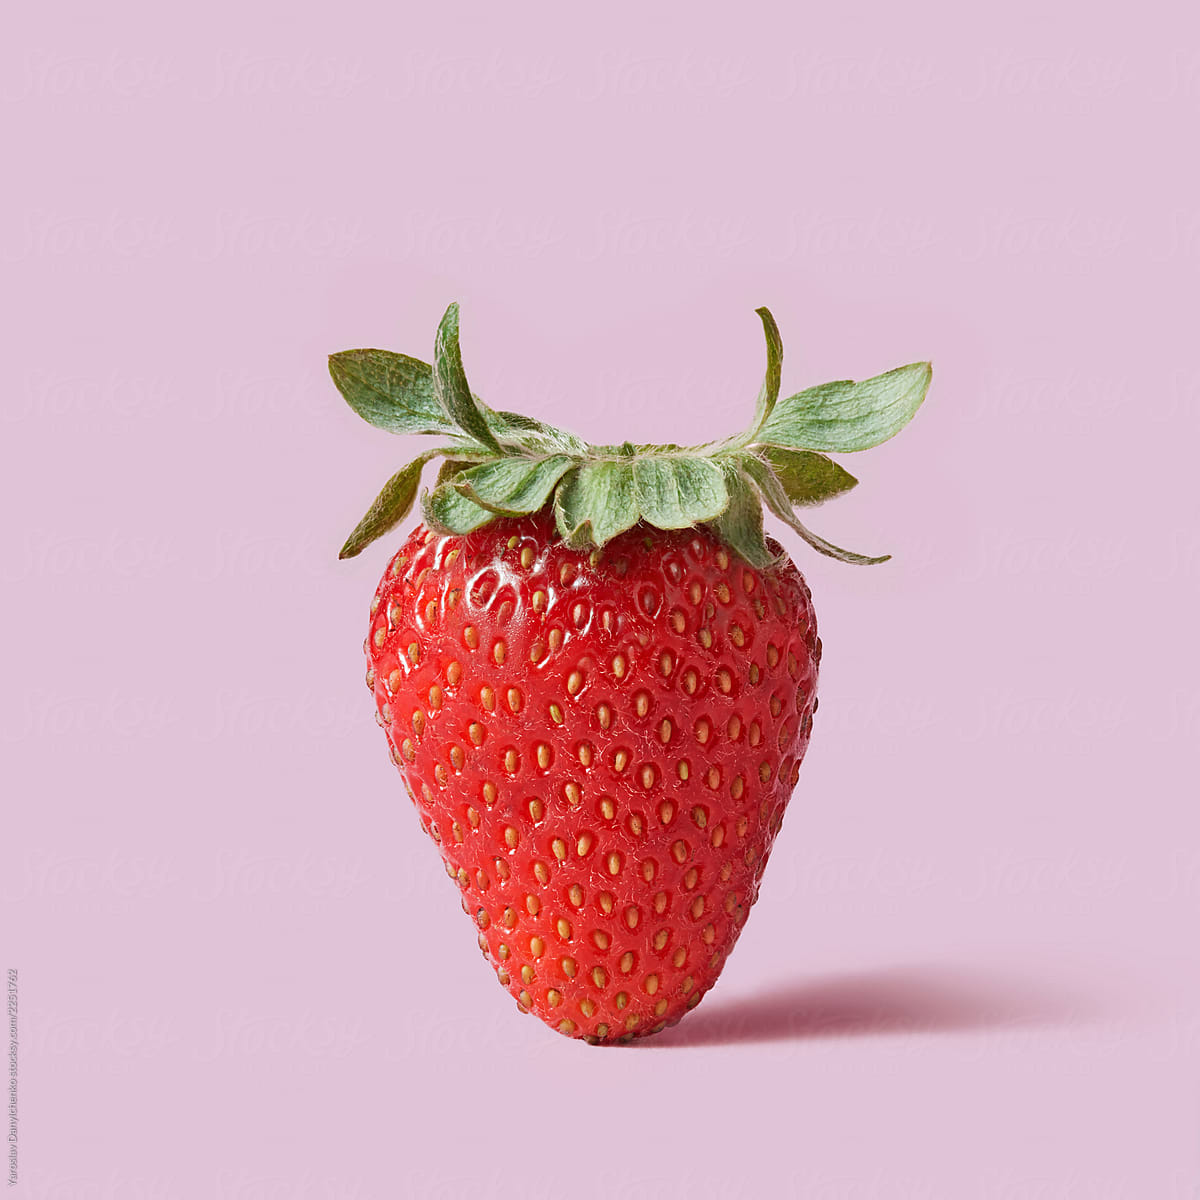 Ripe organic strawberries with green leaves on a pink background